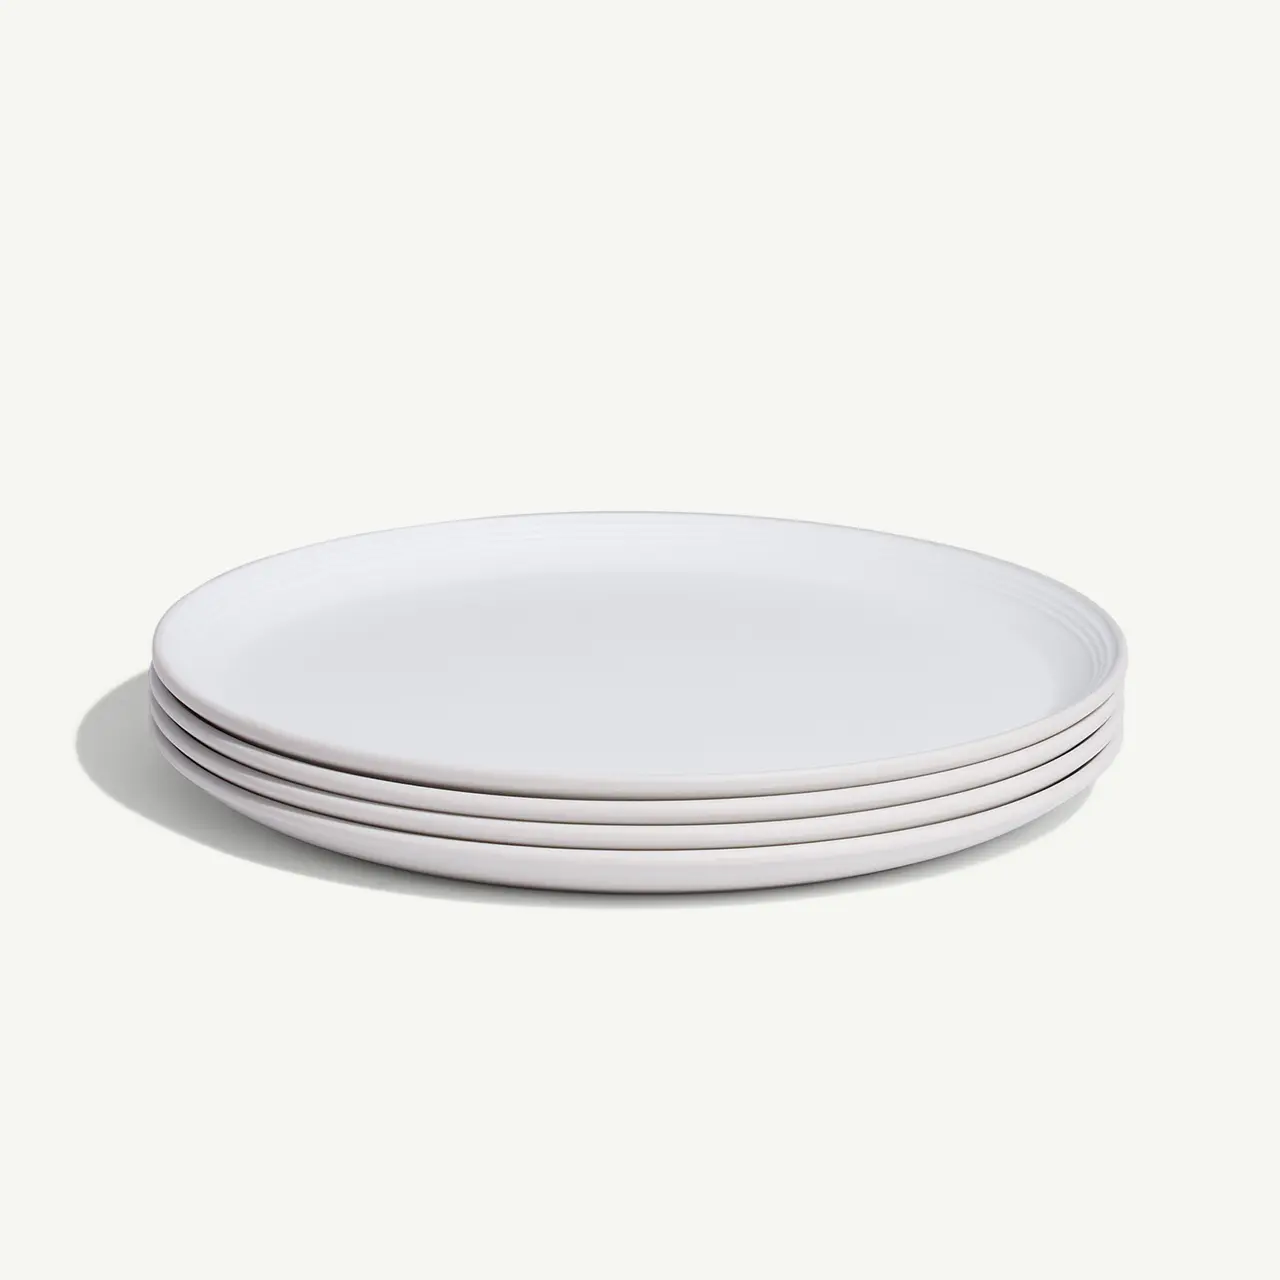 A stack of clean white plates is arranged on a light background.